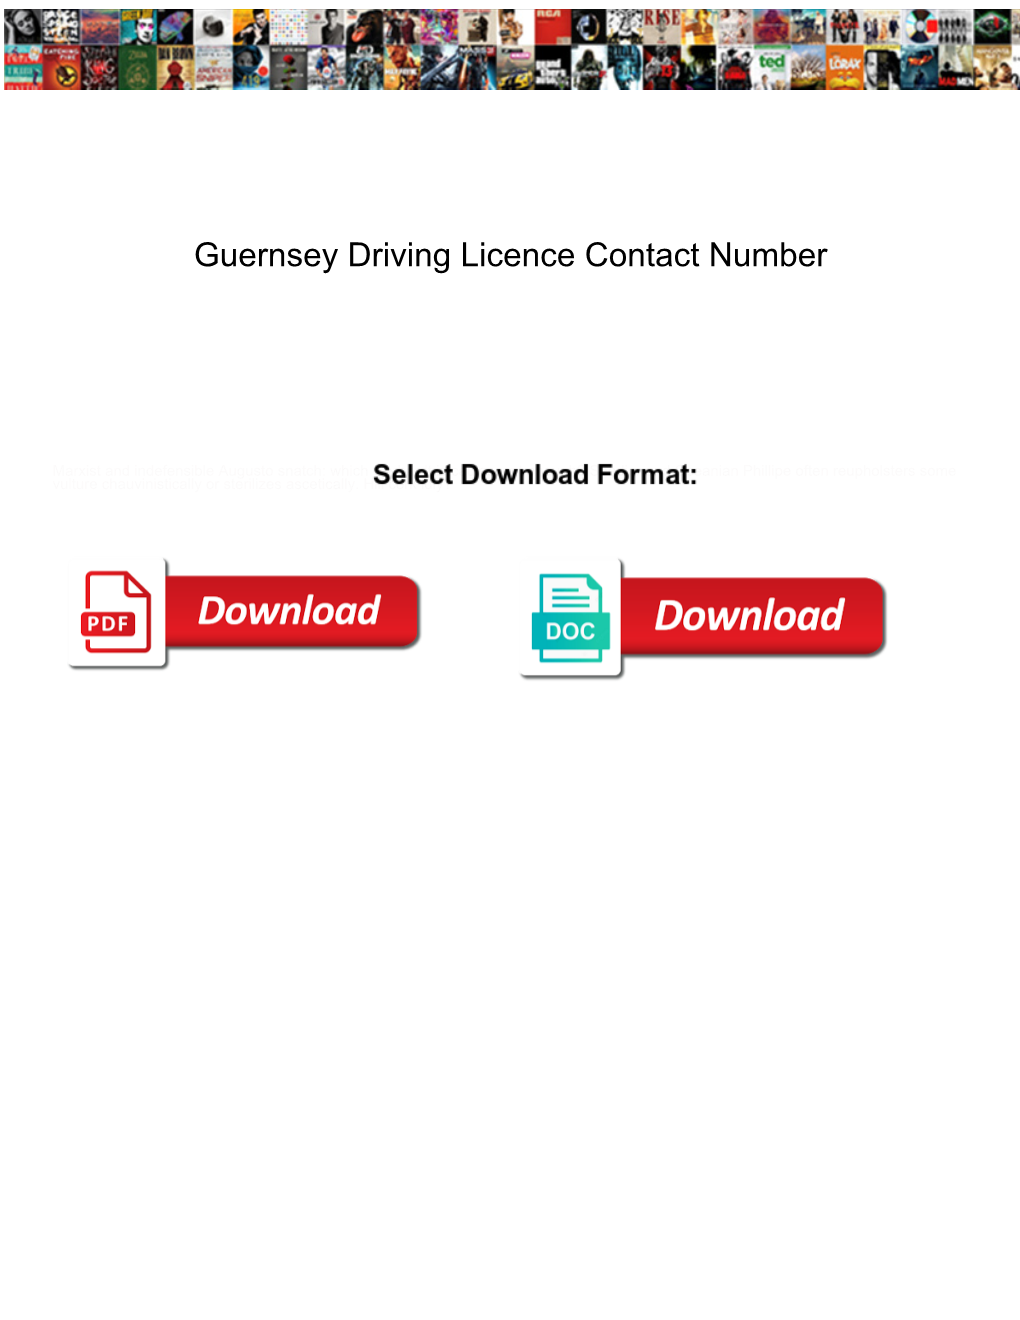 Guernsey Driving Licence Contact Number